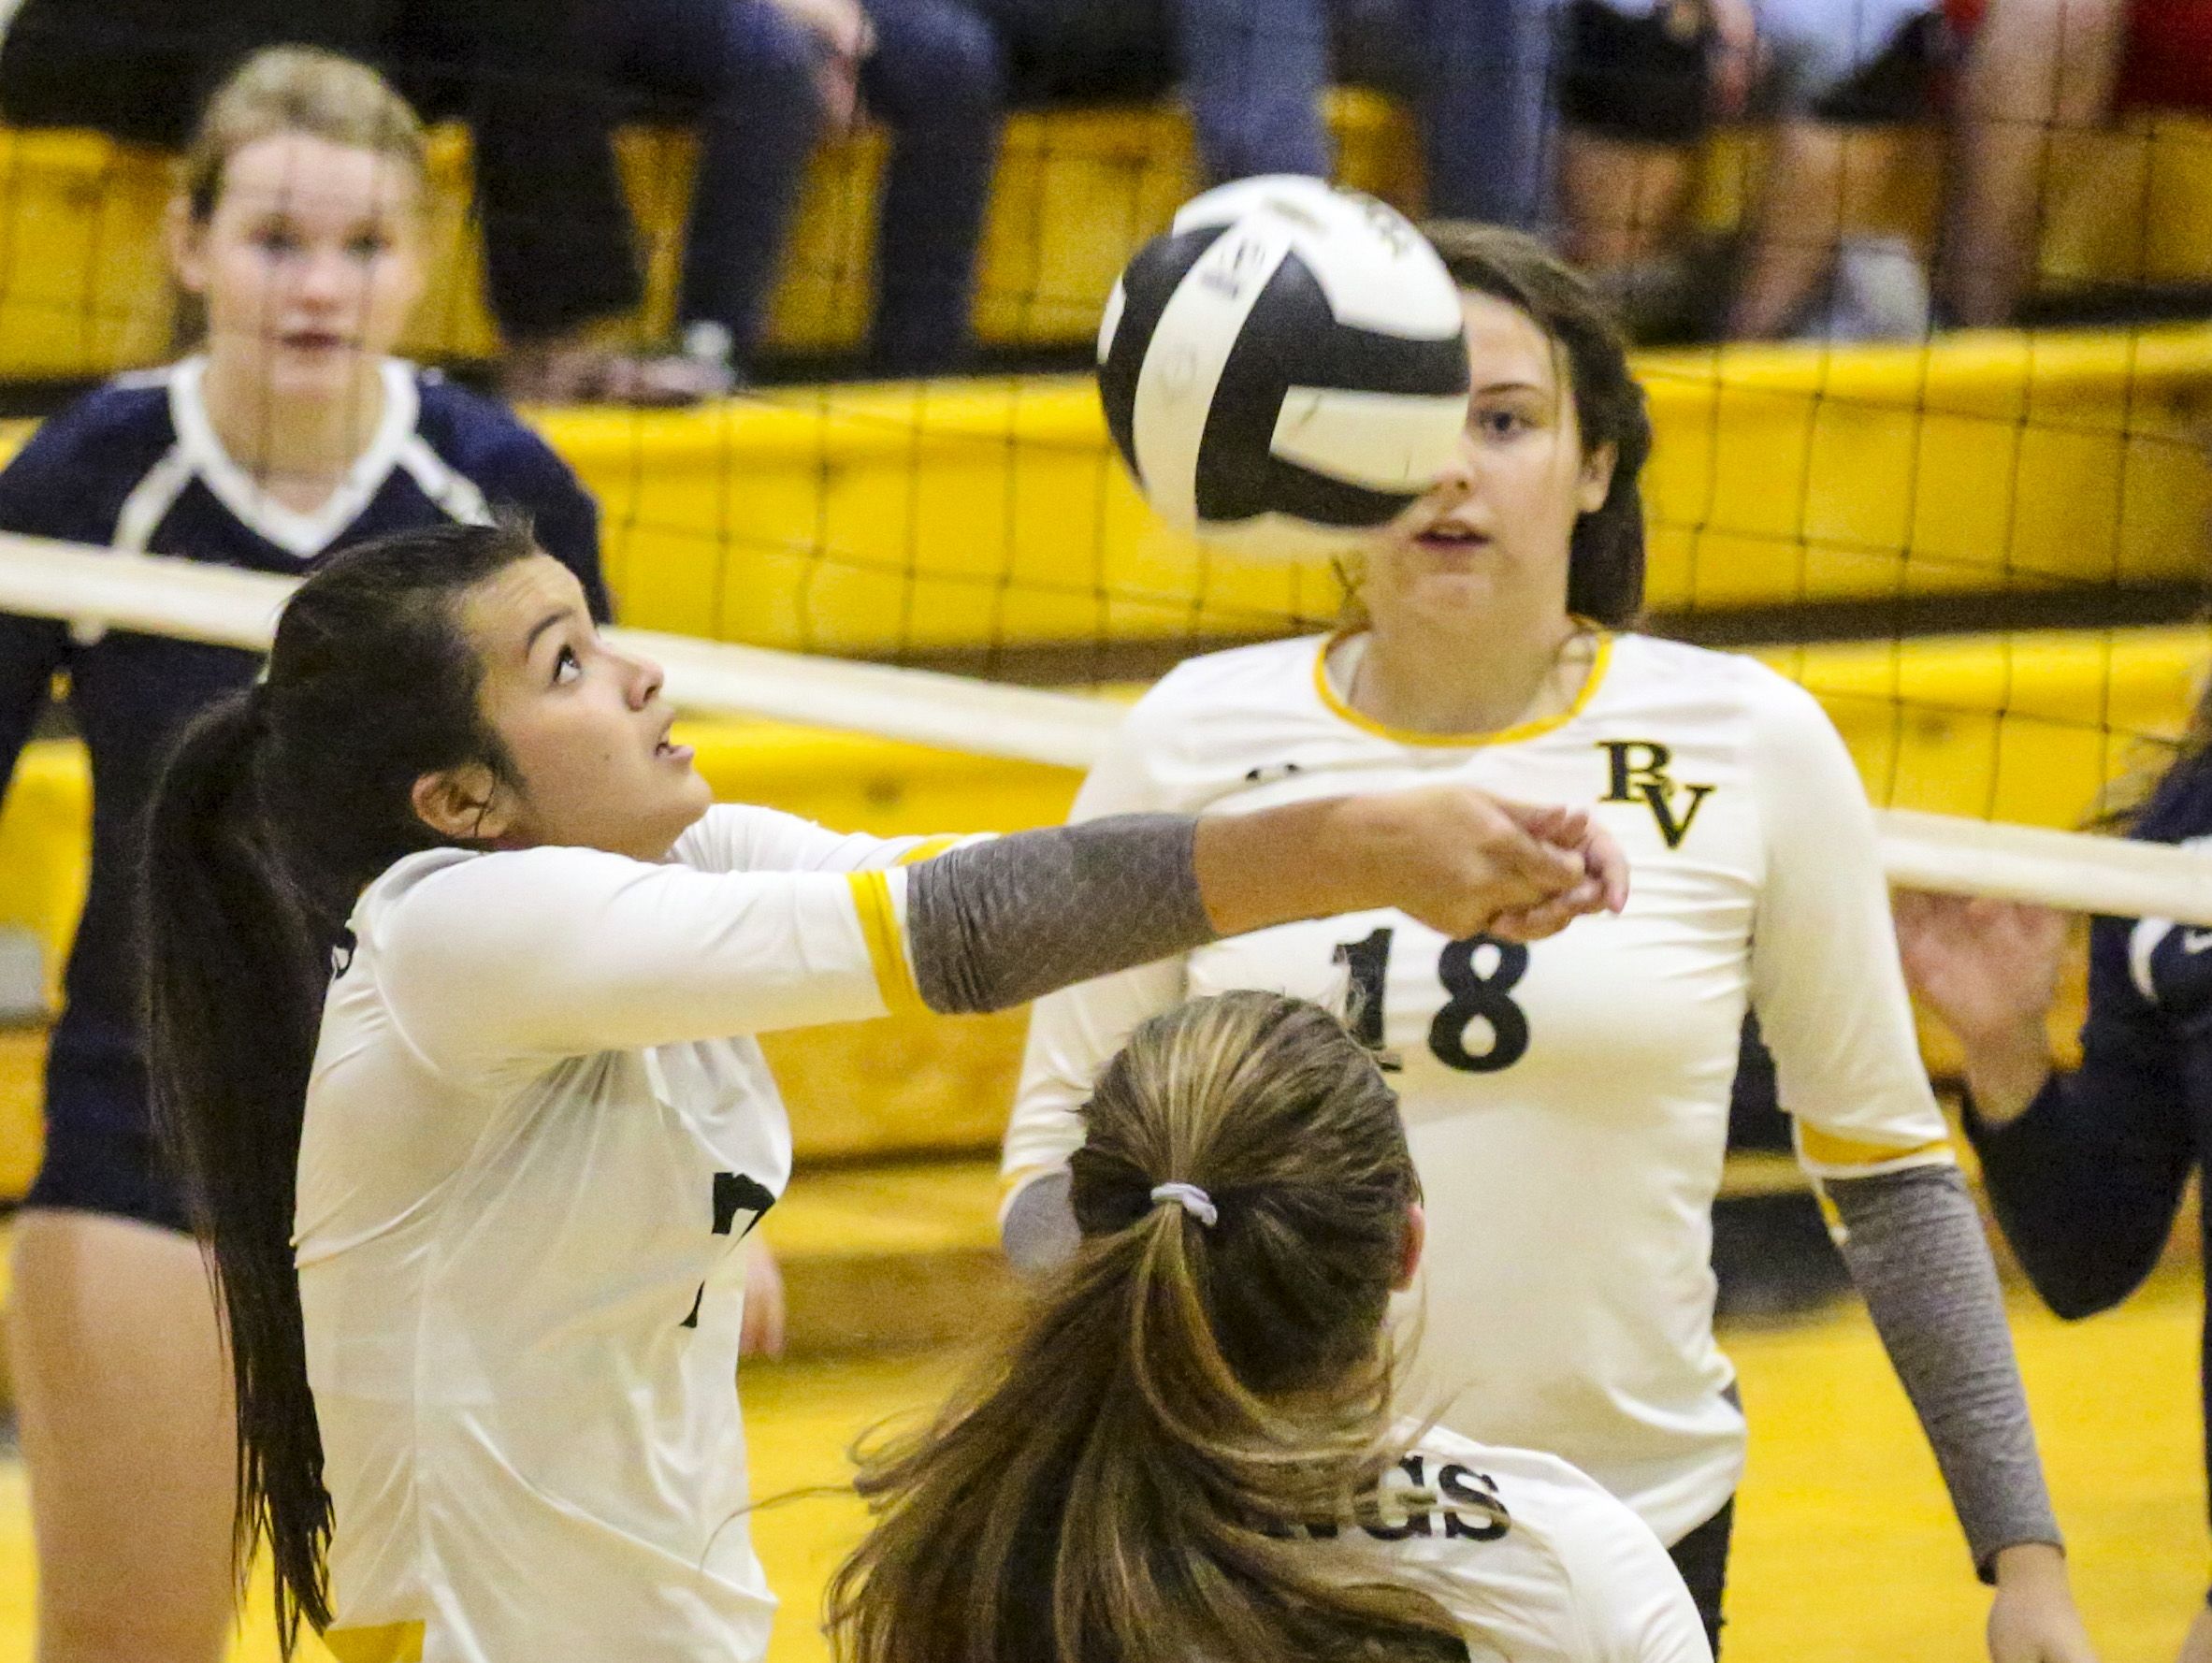 Tampa Academy of Holy Names played Bishop Verot in their Region 5A-3 volleyball quarterfinal.